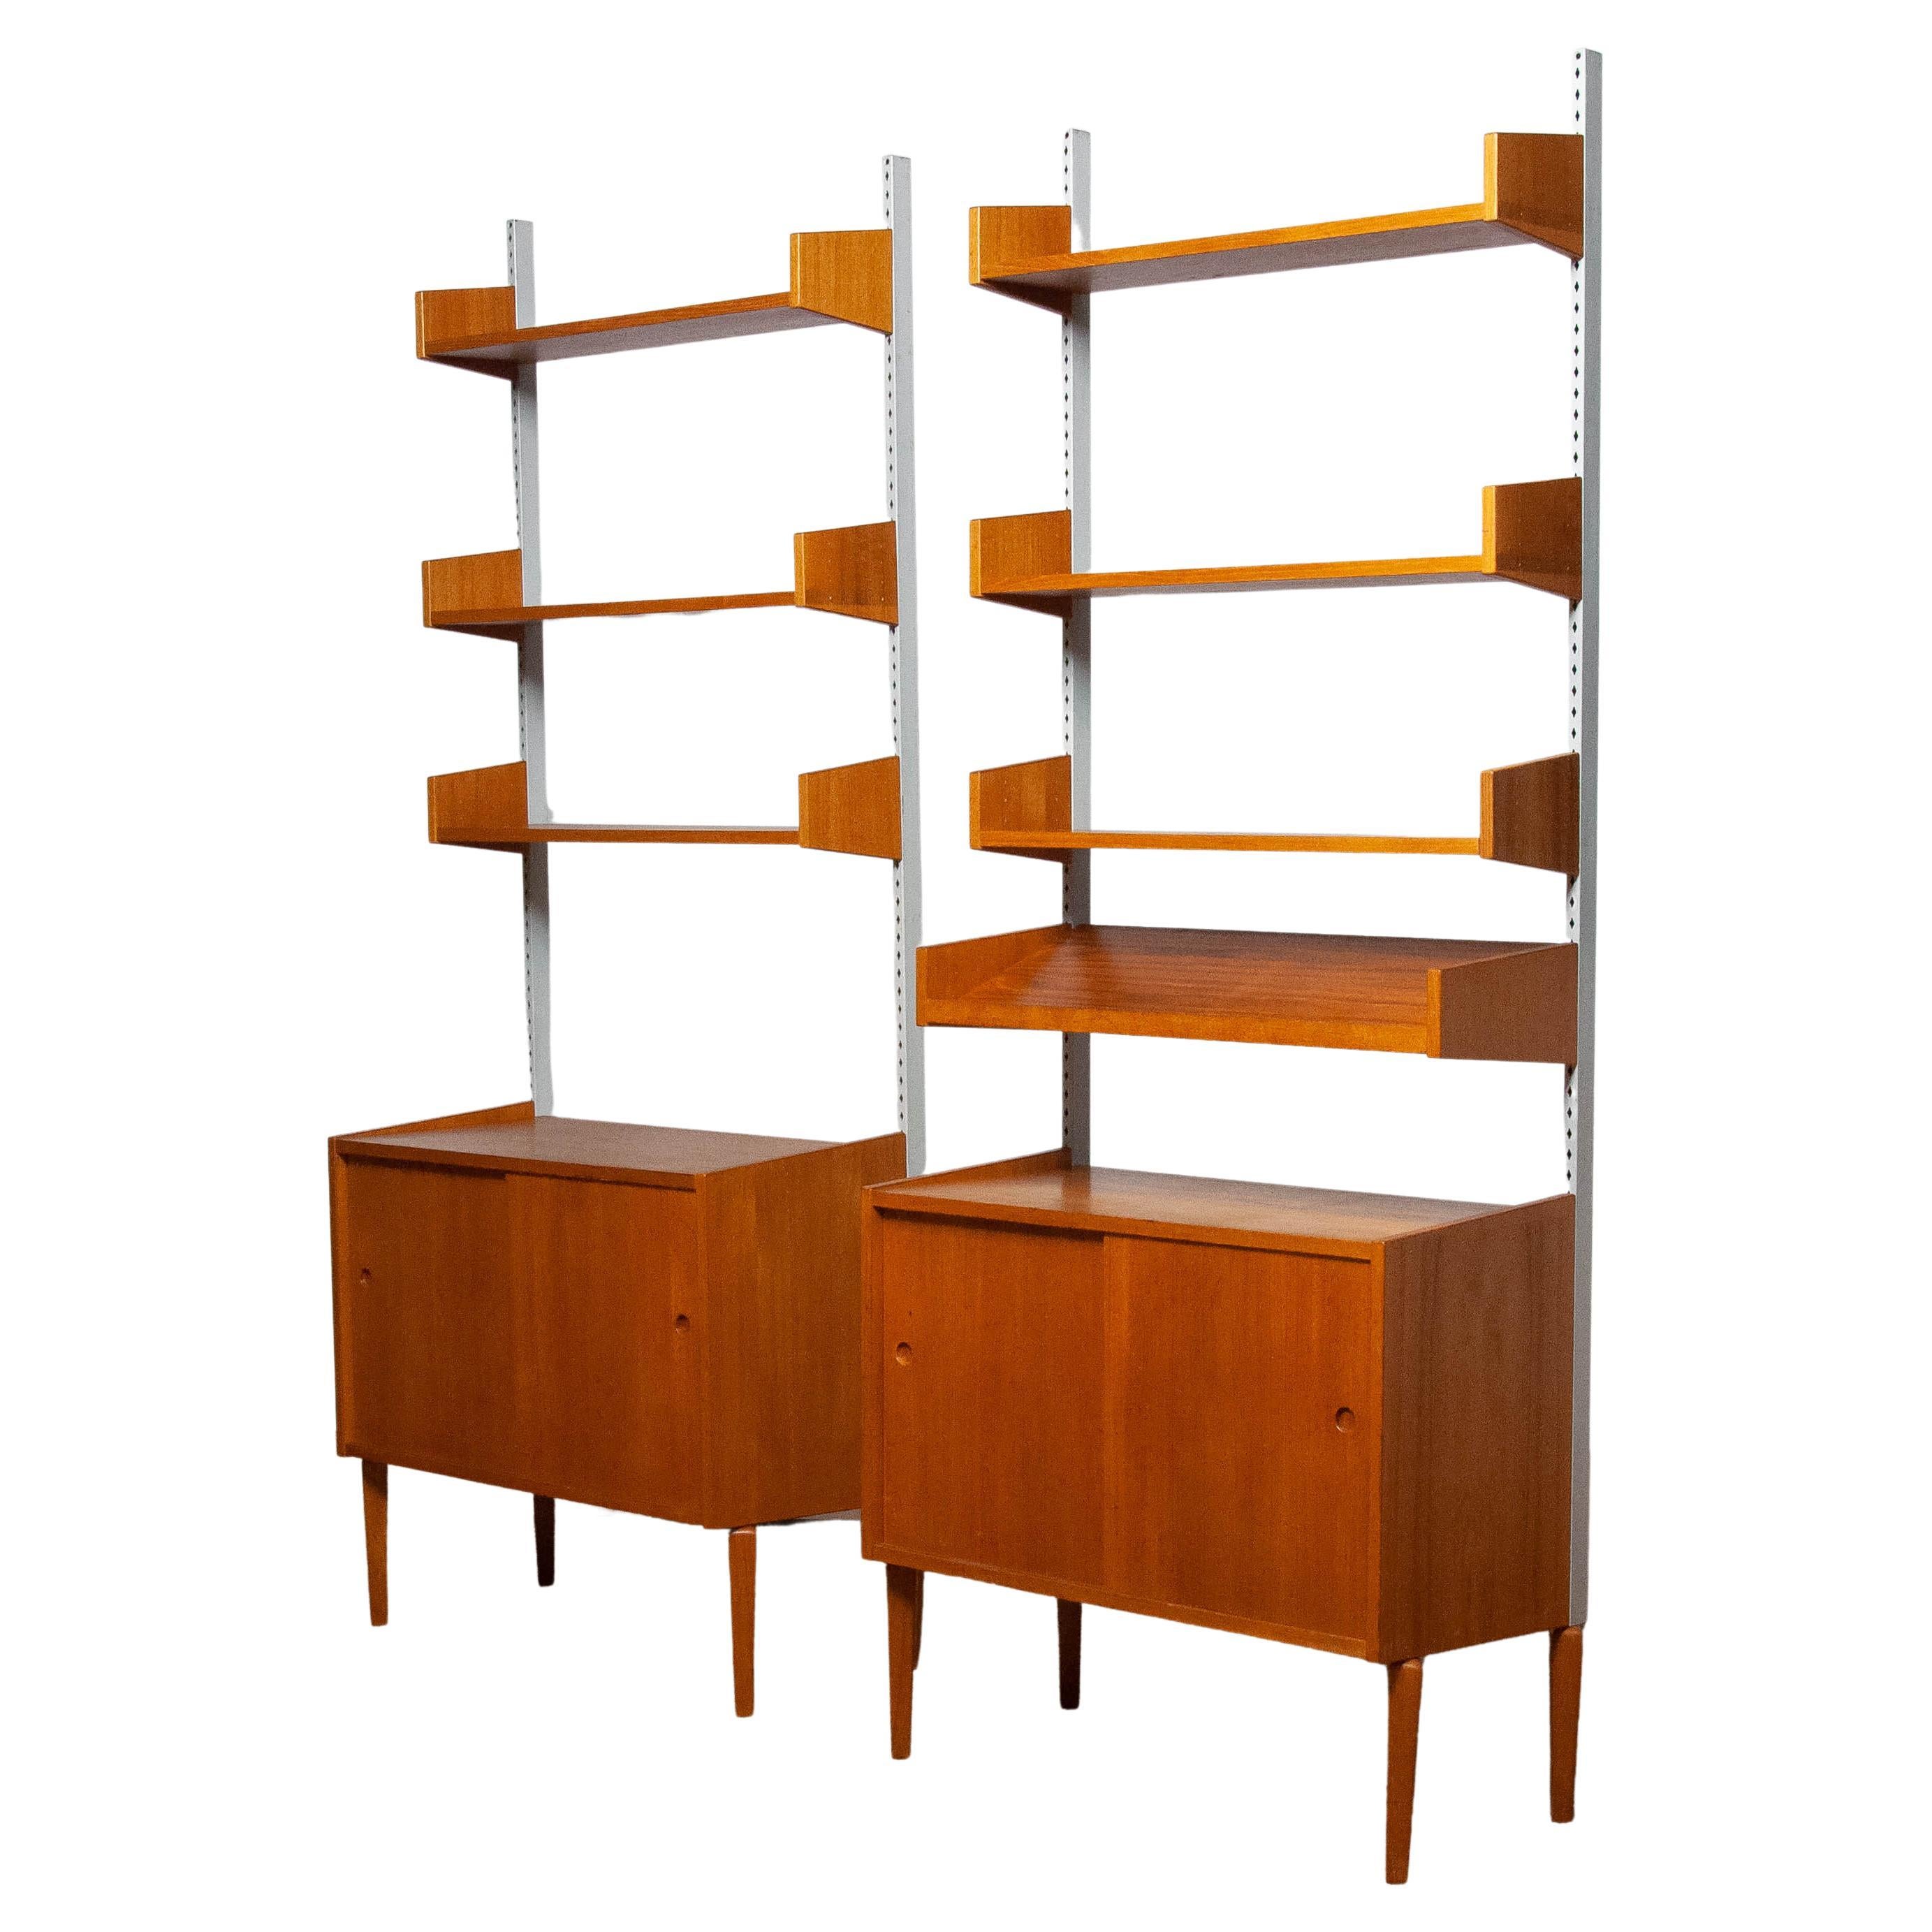 Pair Teak Shelf Systems Bookcases with Steel Bars by Harald Lundqvist for Lizzy